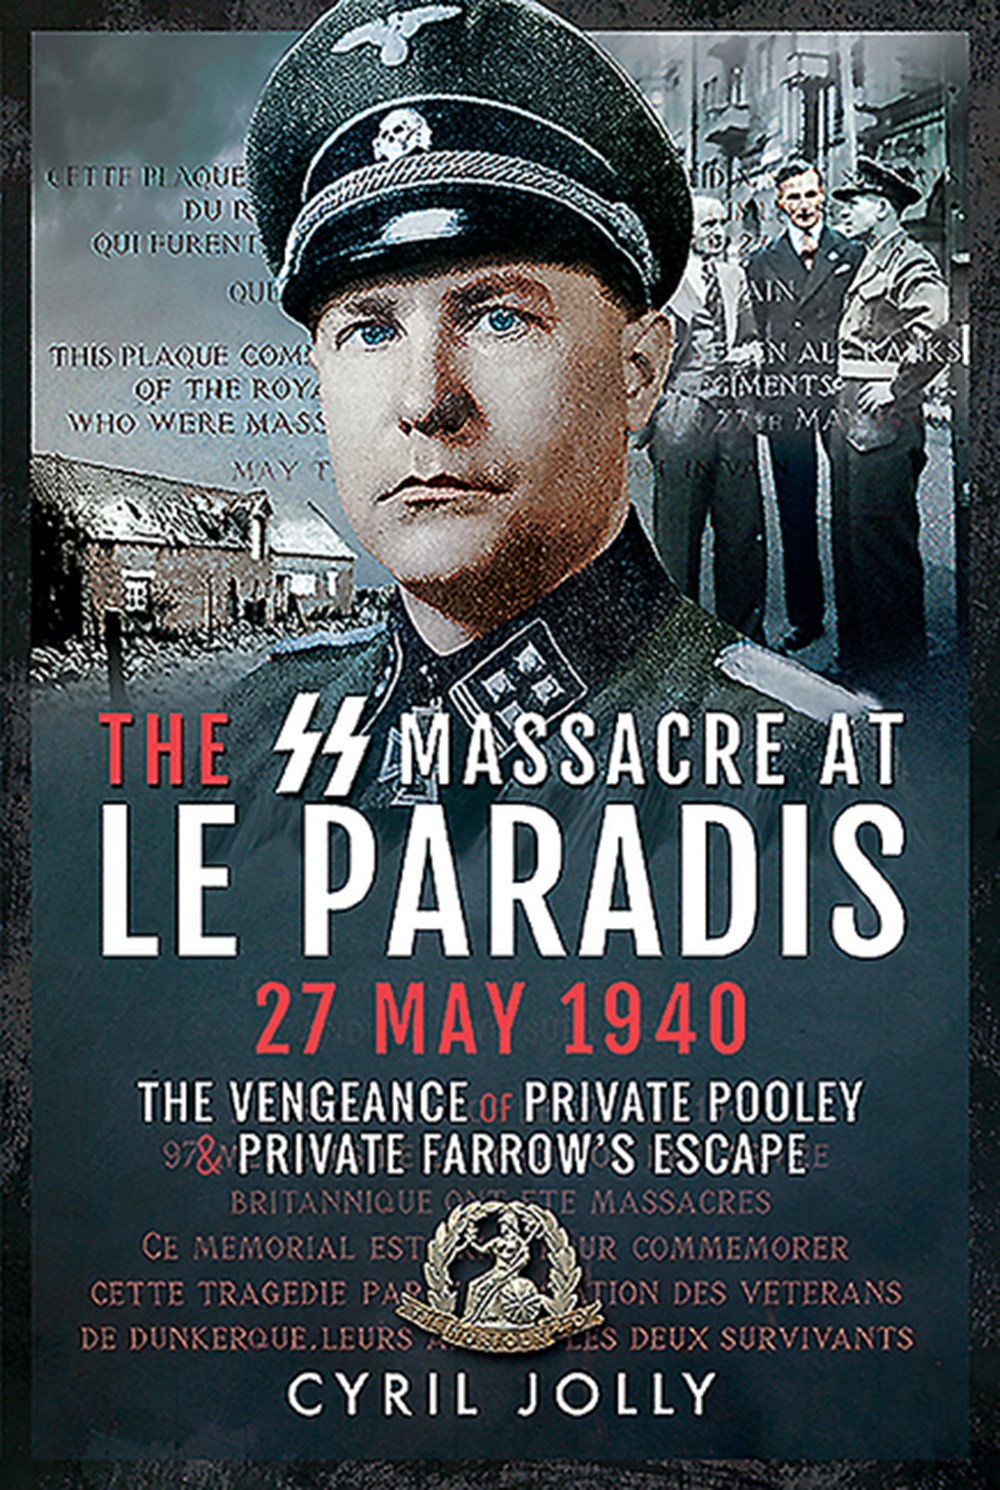 SS Massacre at Le Paradis, 27 May 1940: The Vengeance of Private Pooley